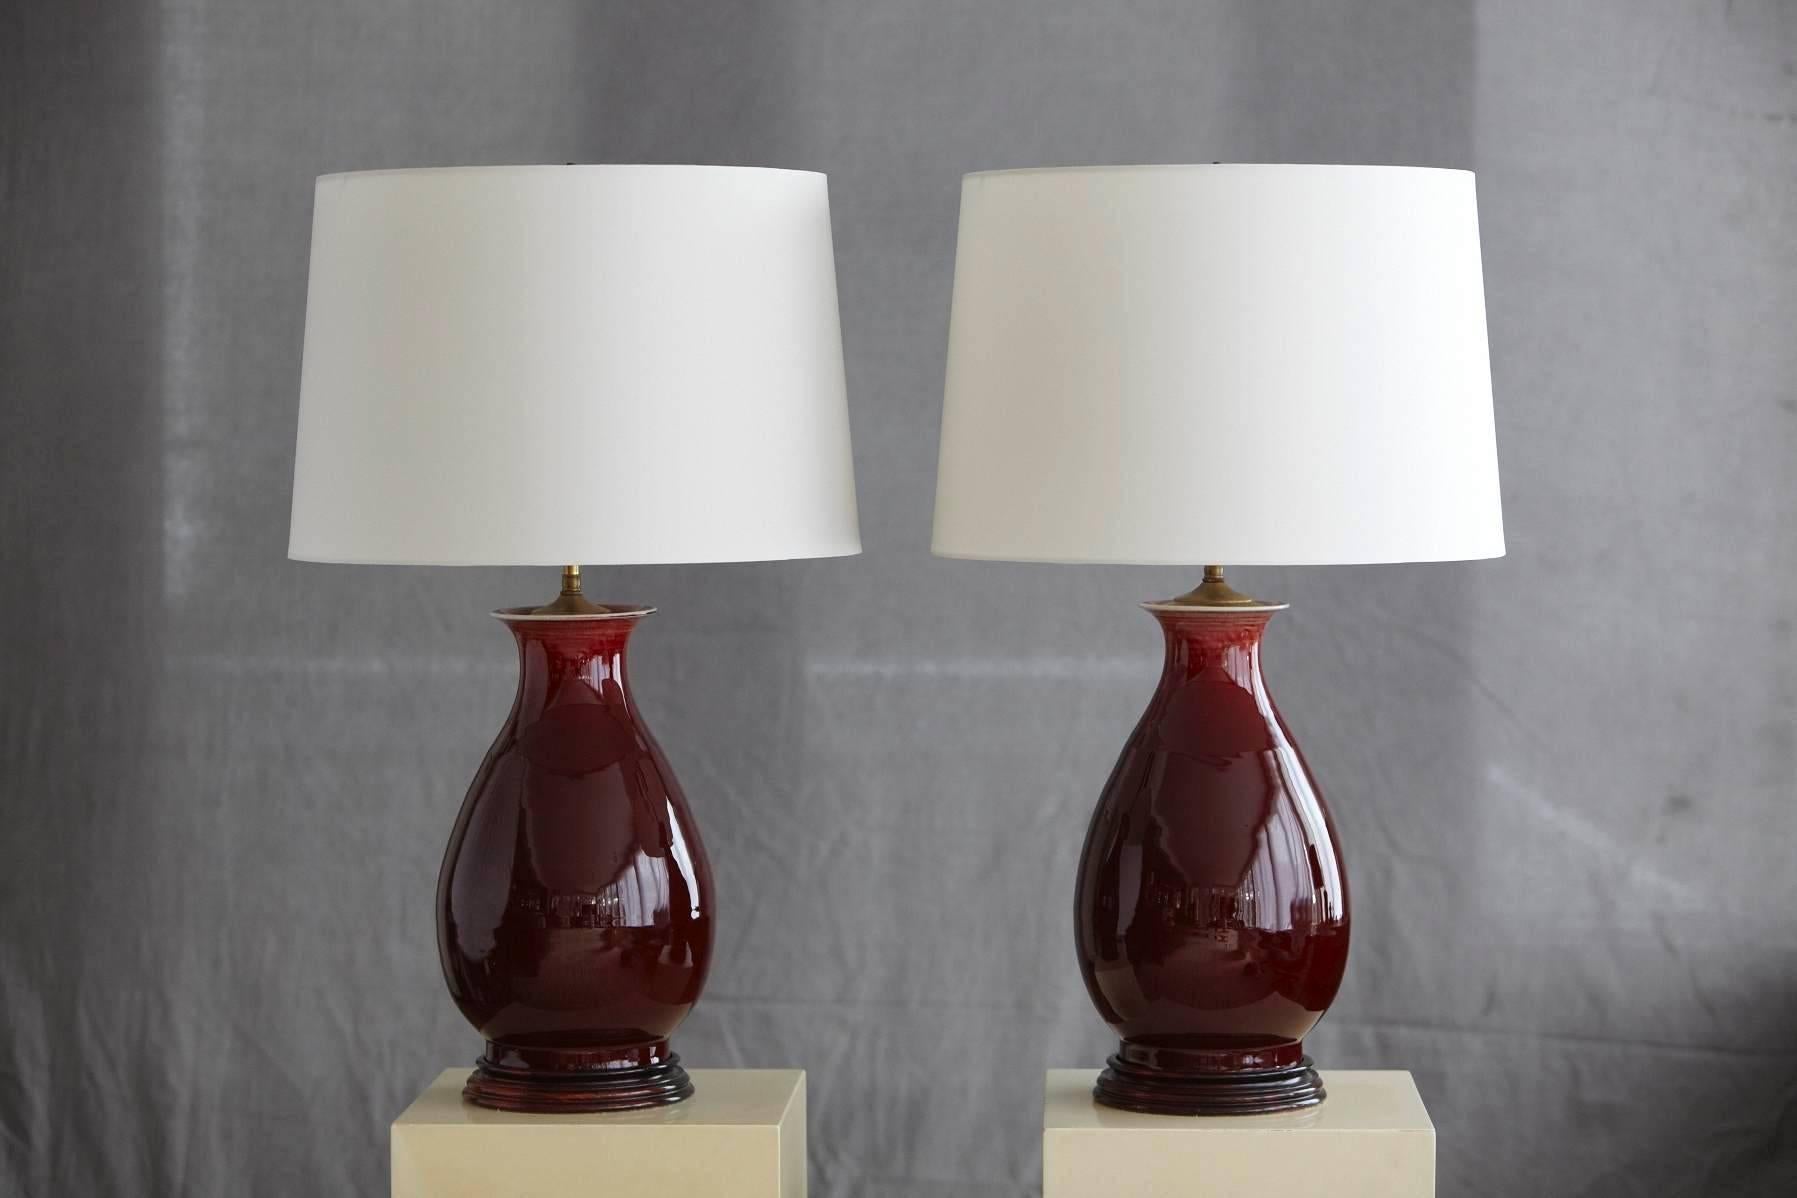 Beautiful pair of deep red glazed Italian ceramic table lamps with new ivory colored shades in excellent condition. The shade height is adjustable.
Dimensions: Base diameter 9